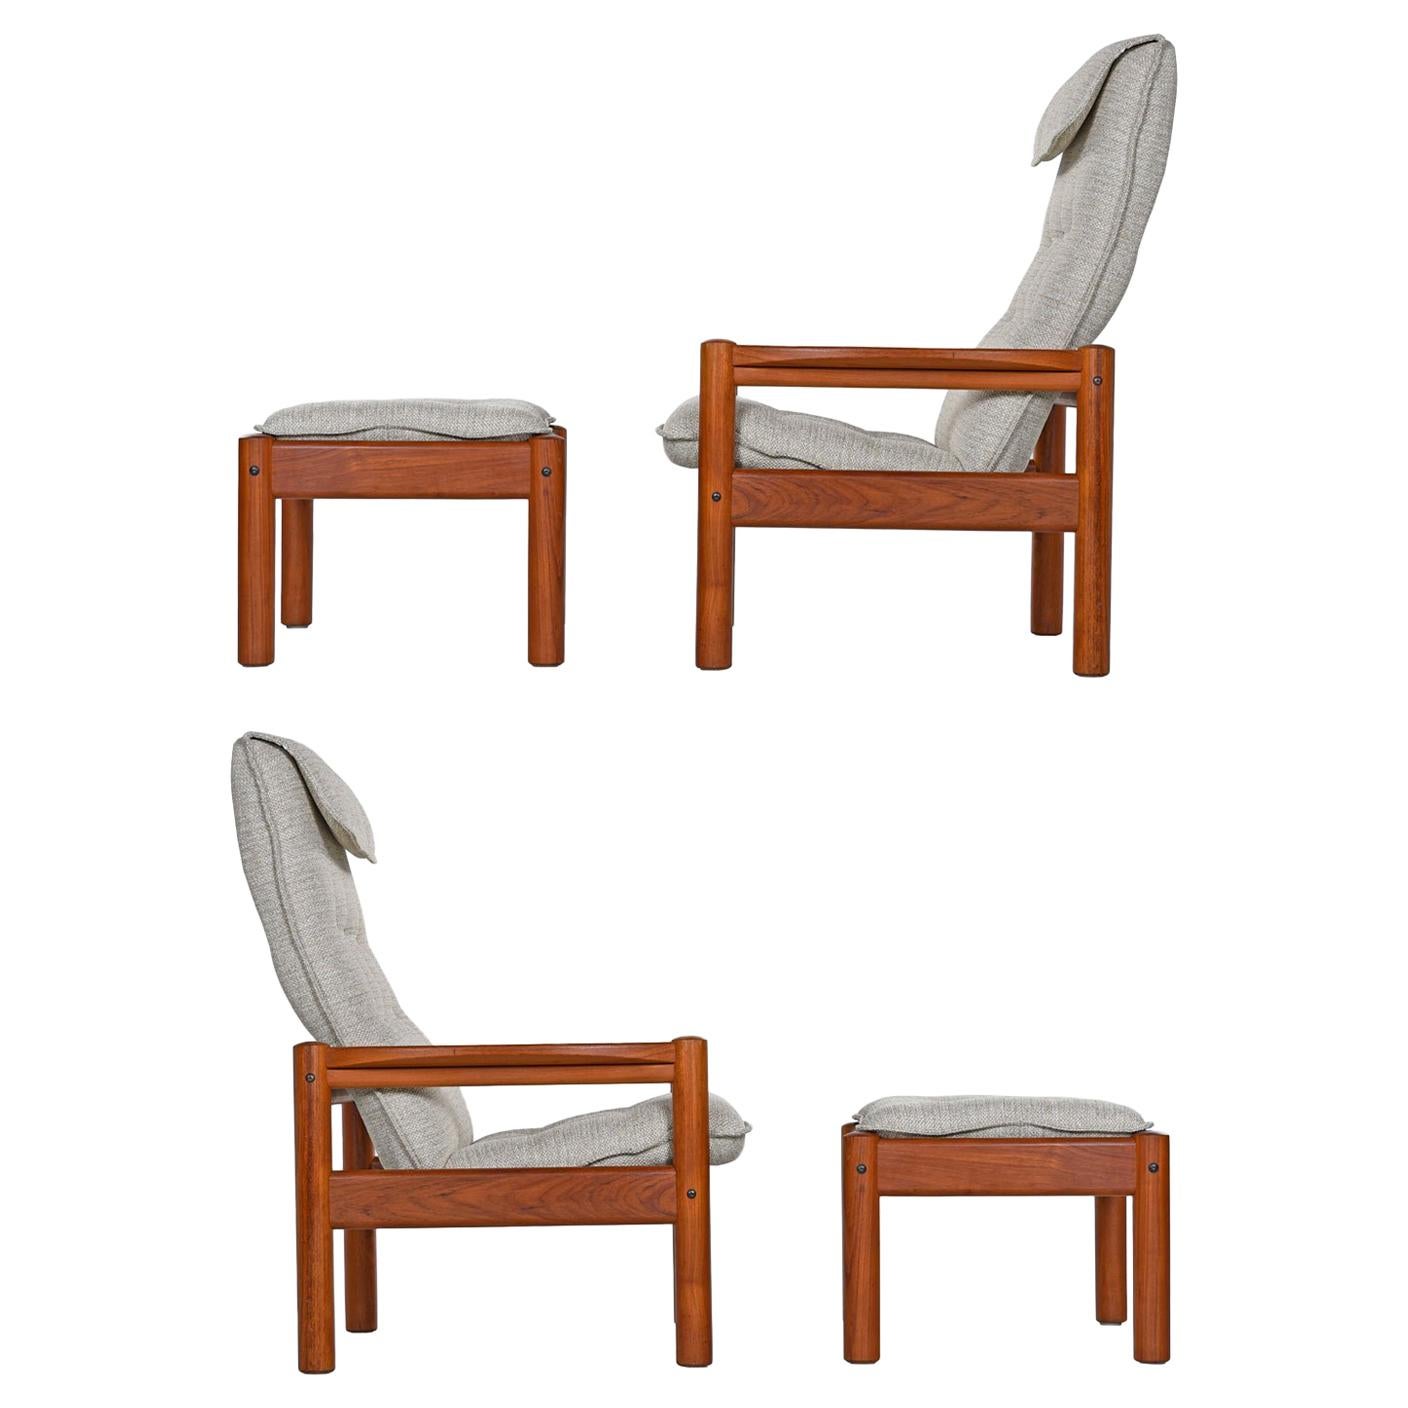 Pair of Domino Mobler high back teak lounge chairs and matching ottomans restored to near mint condition. Solid teak frames with rigid construction. The sculpted arms stand out within the sleek, Minimalist, modern design. A perfect balance of